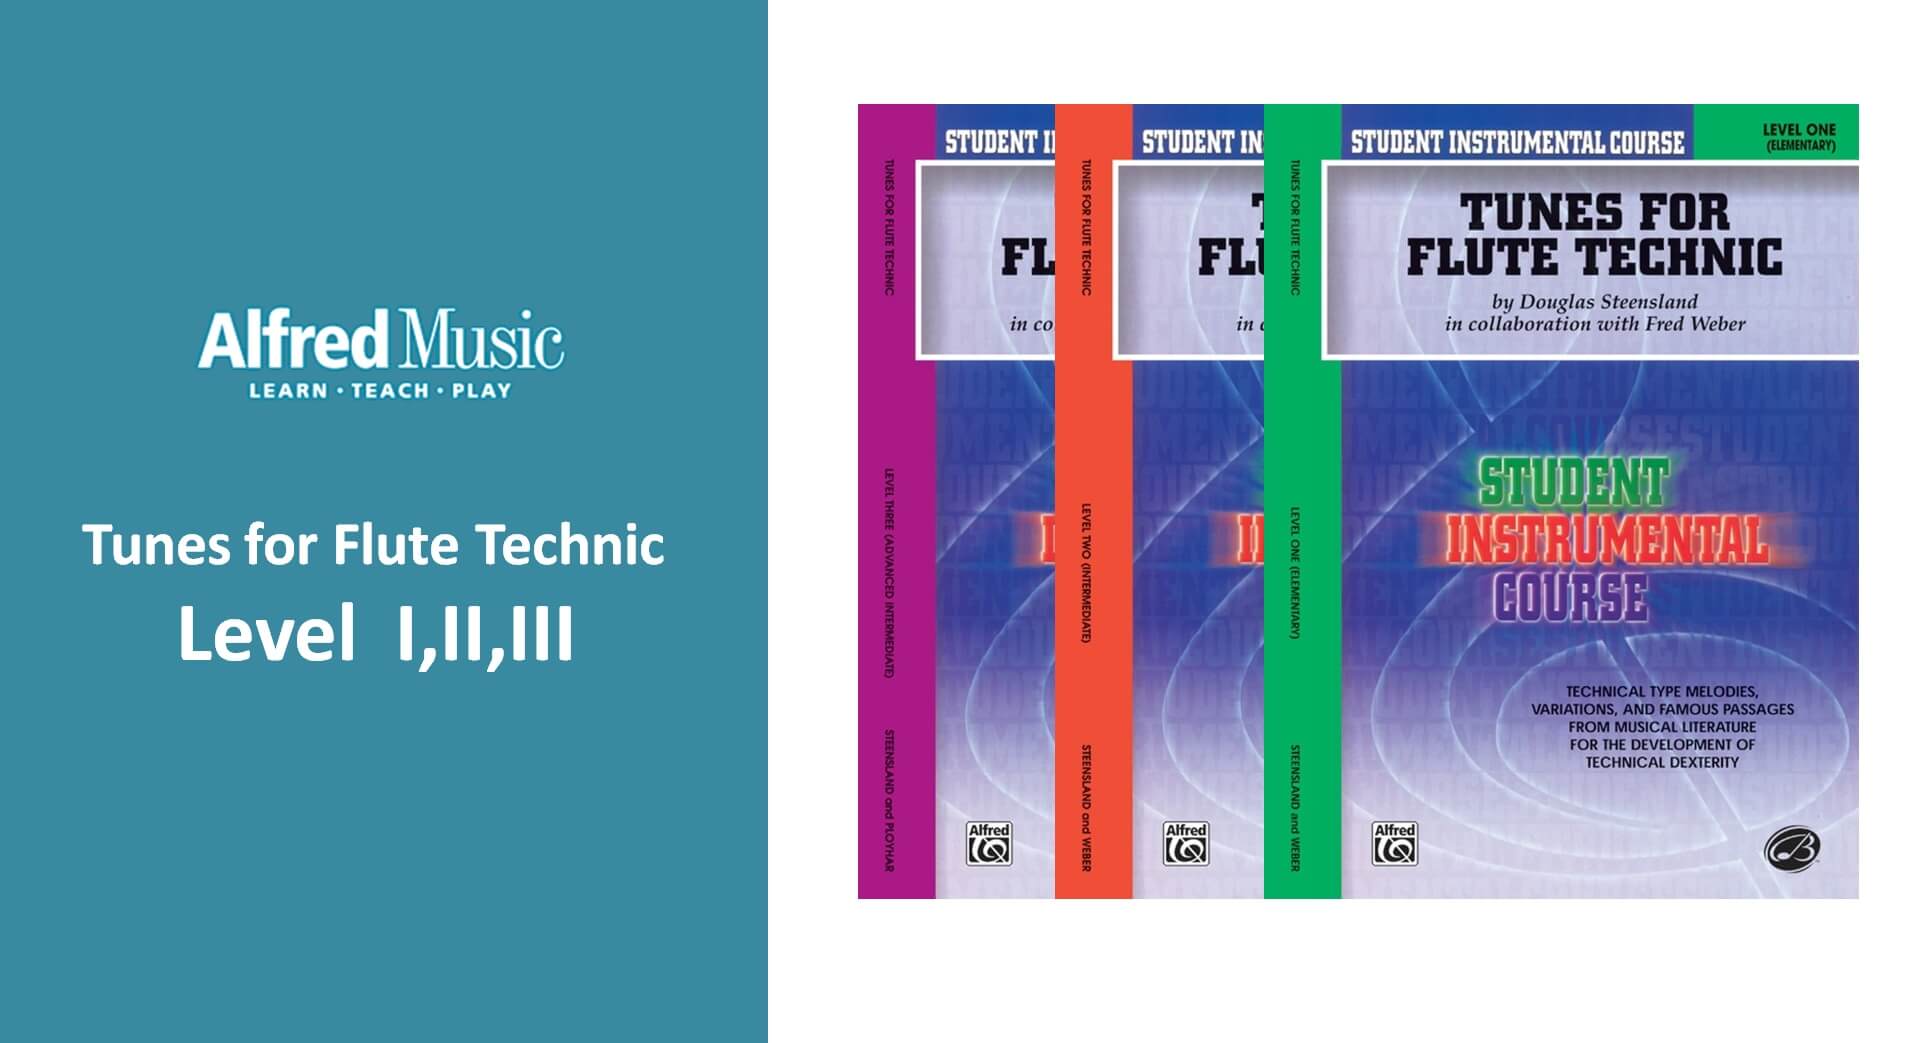 Student Instrumental Course: Tunes for Flute Technic